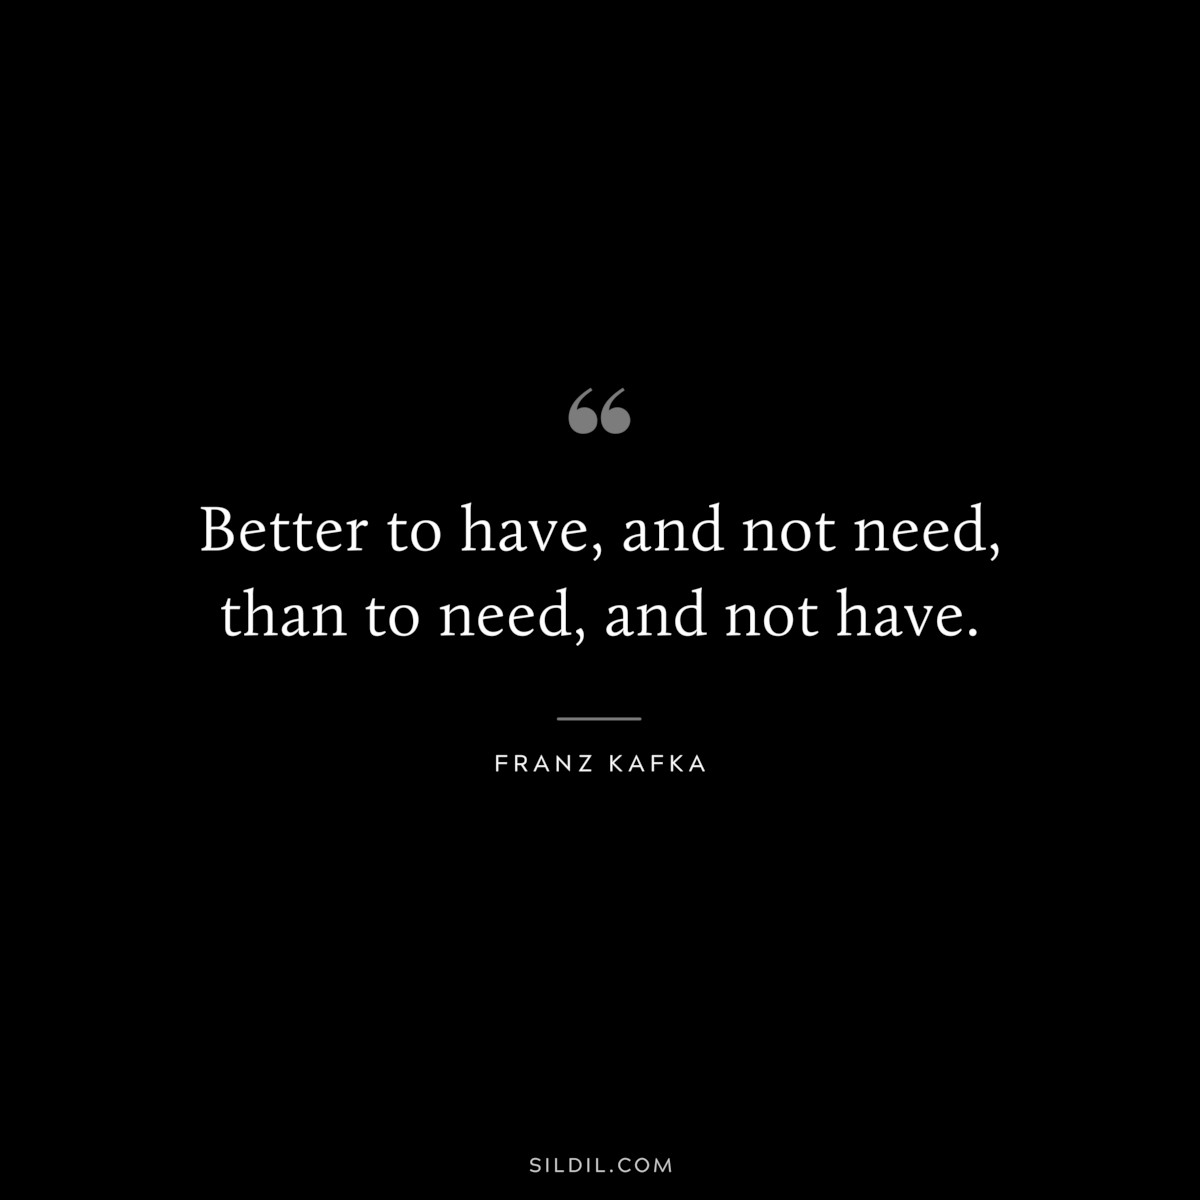 Better to have, and not need, than to need, and not have. ― Franz Kafka